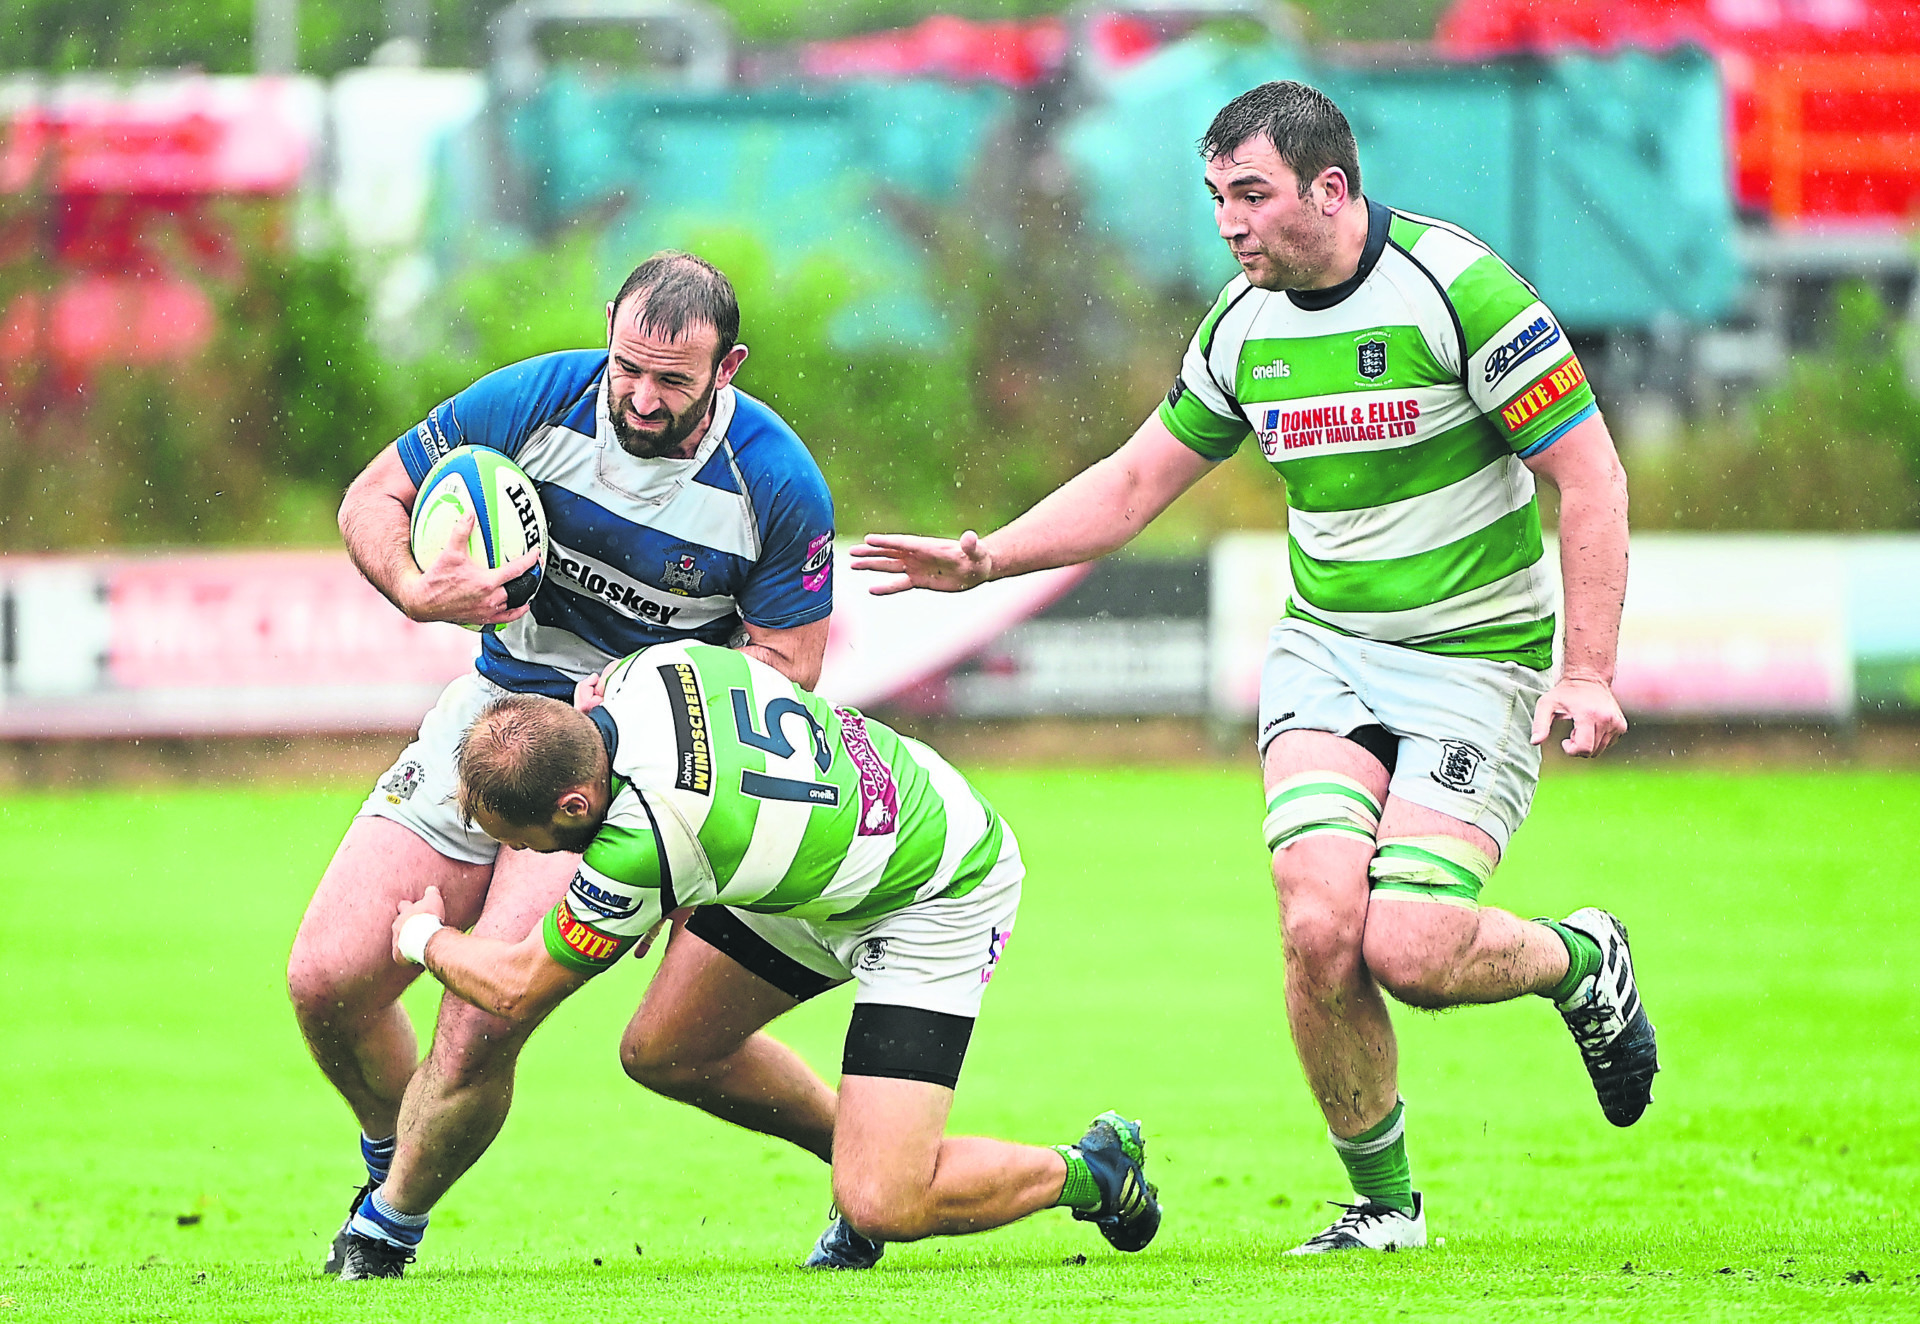 Omagh coach frustated by derby defeat to Dungannon